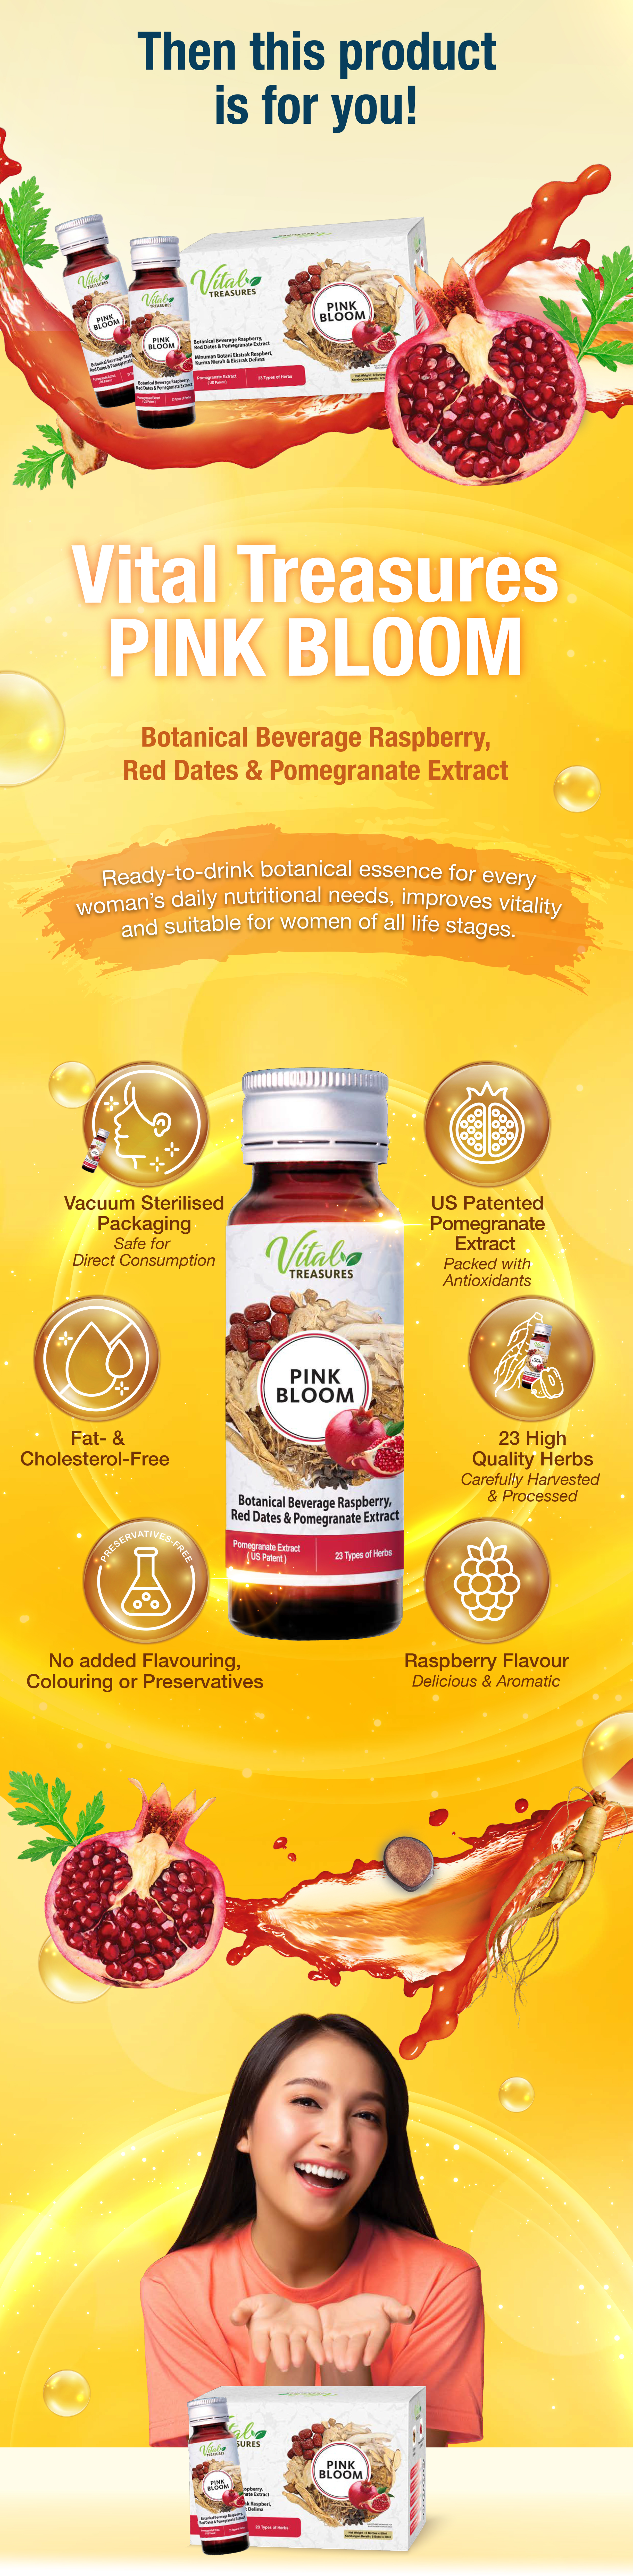 VITAL TREASURES PINK BLOOM Botanical Beverage Raspberry, Red Dates & Pomegranate Extract